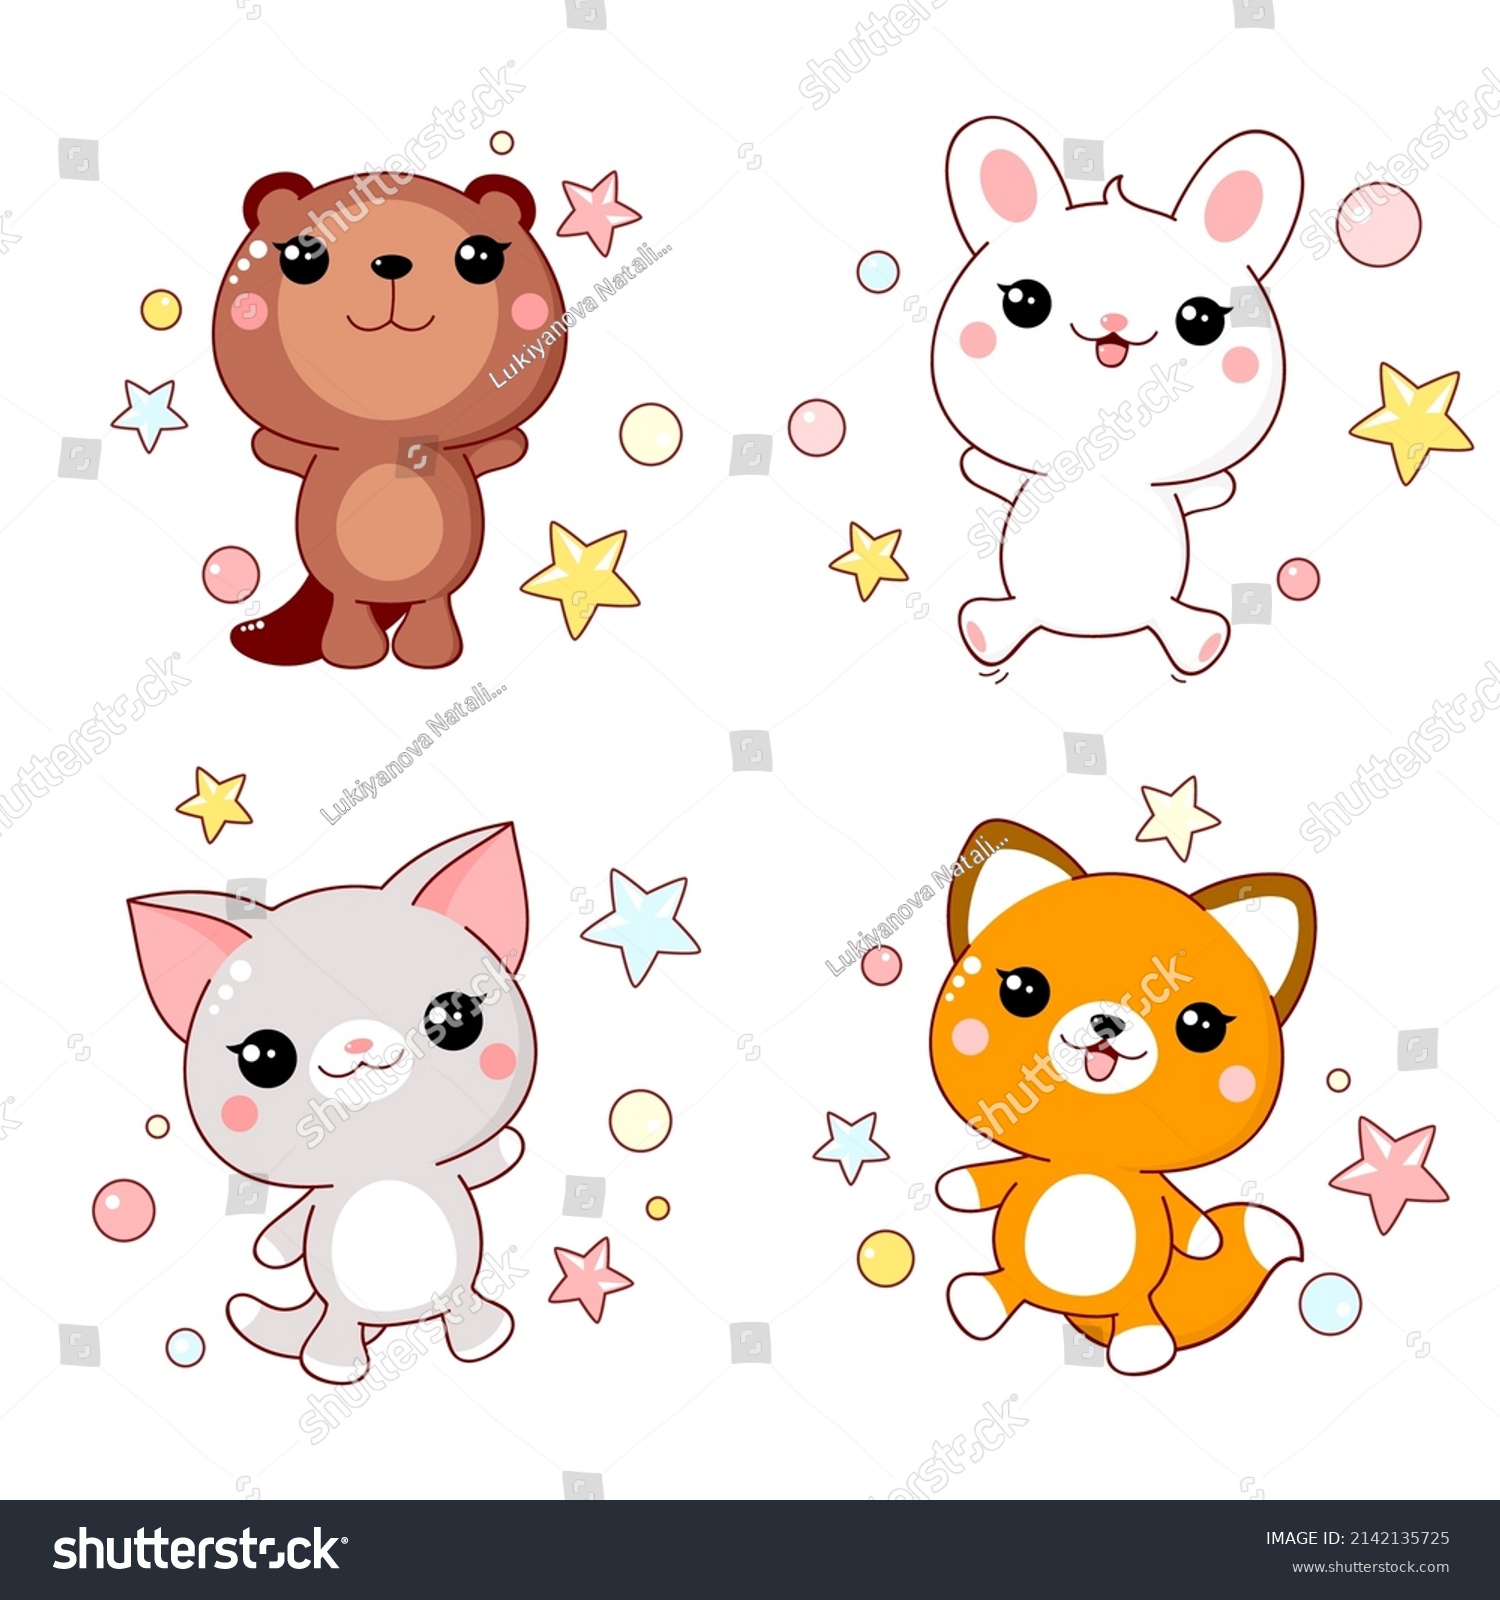 SVG of Set of cute animals baby - fox, cat, bunny, beaver. Childish collection of kawaii characters. Vector illustration EPS8 svg